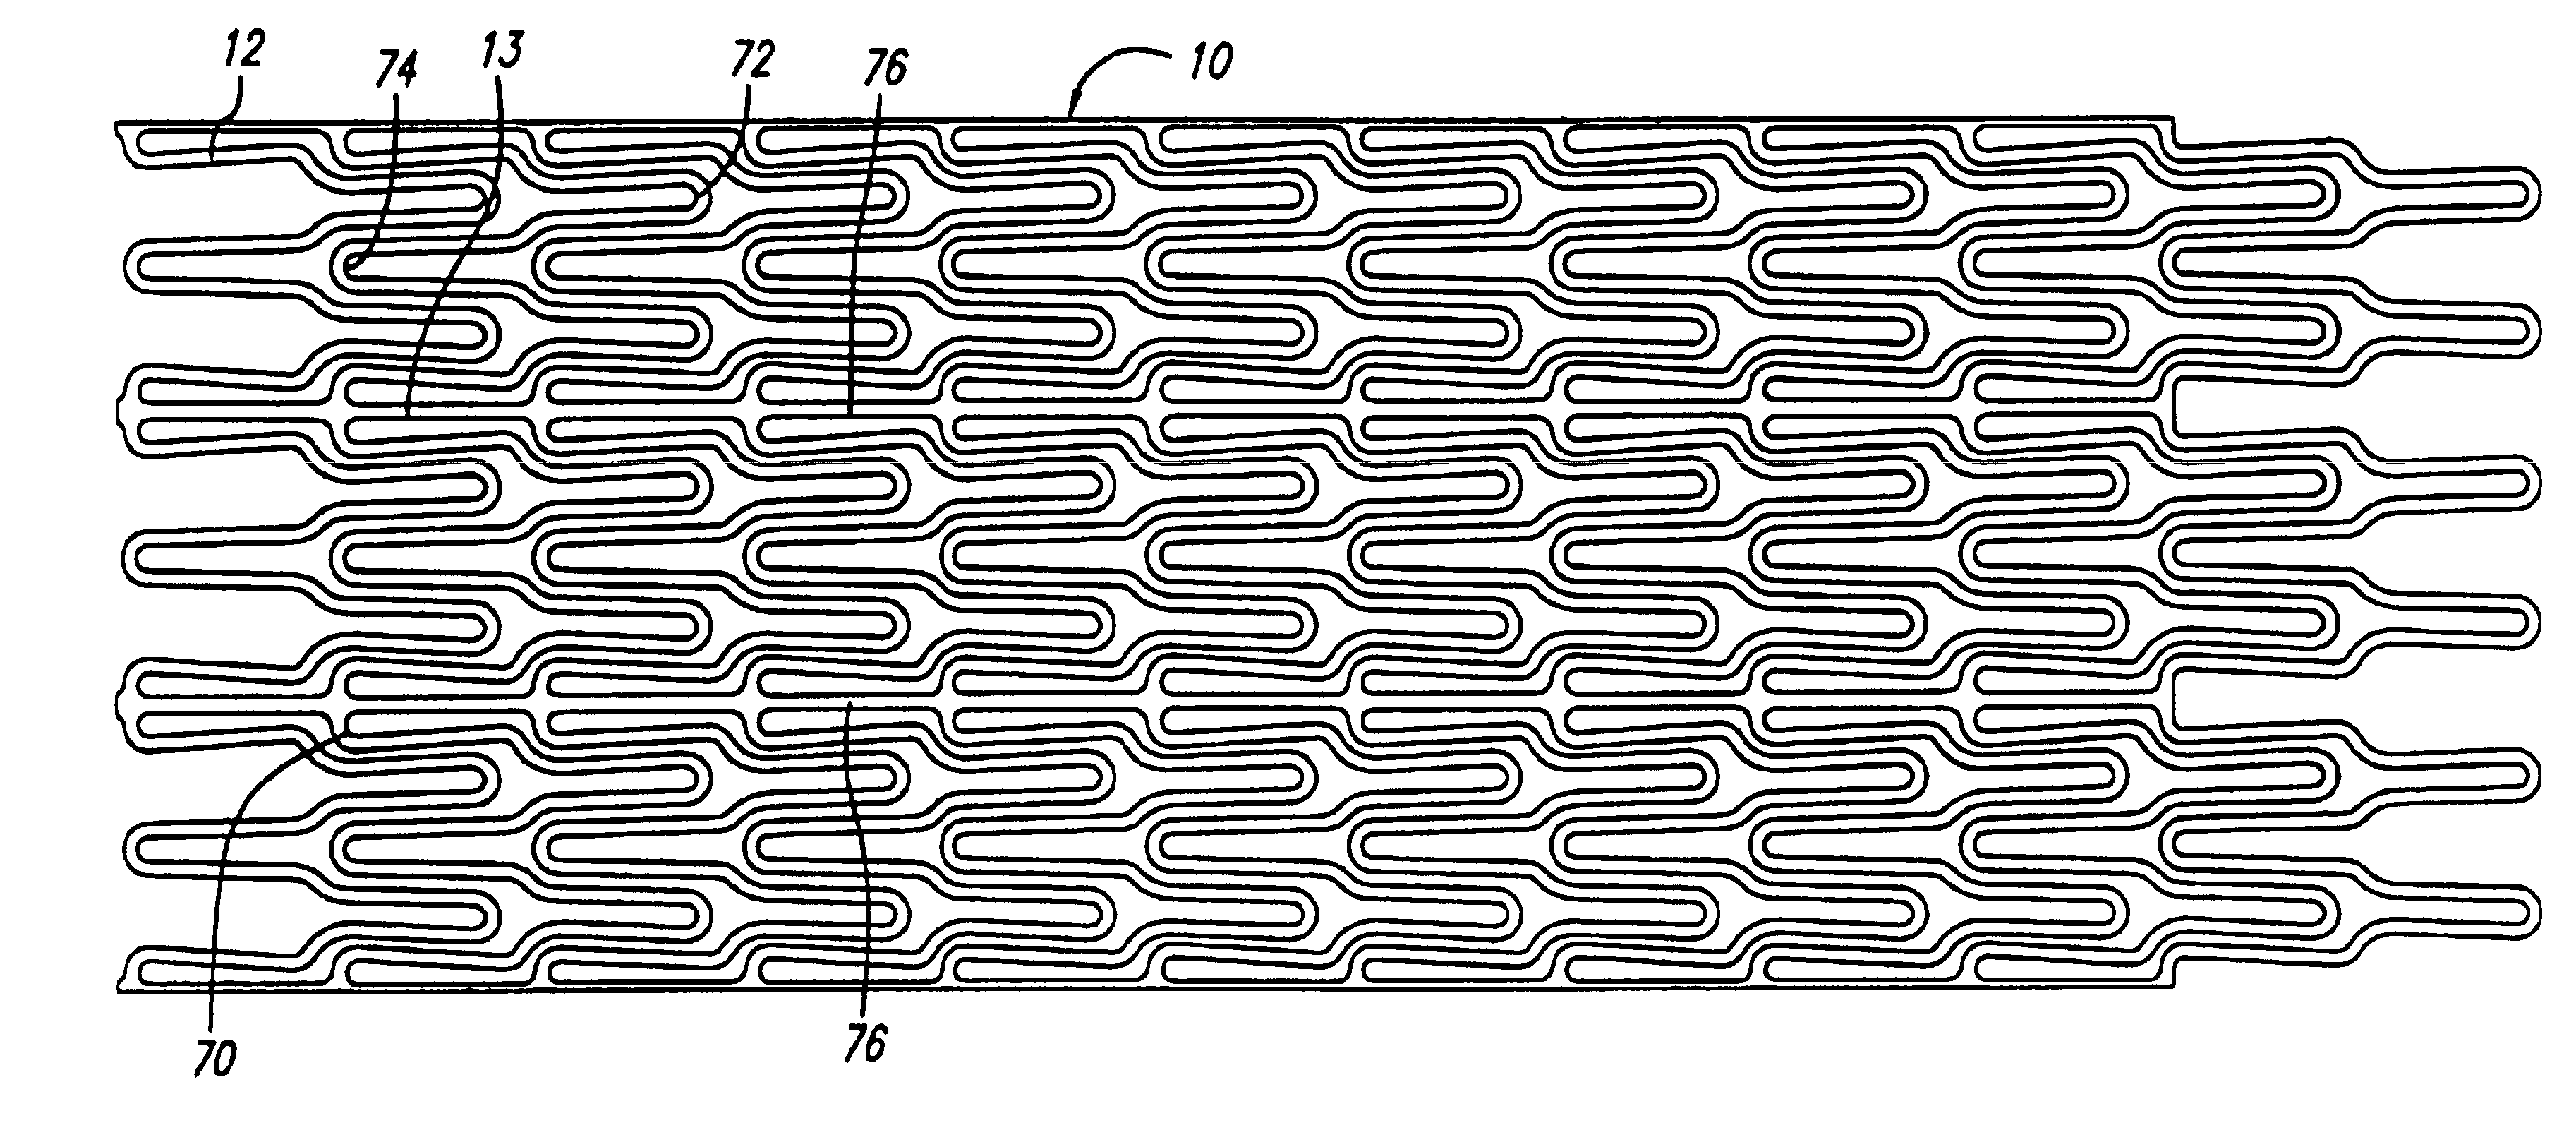 Self-expanding stent with enhanced delivery precision and stent delivery system